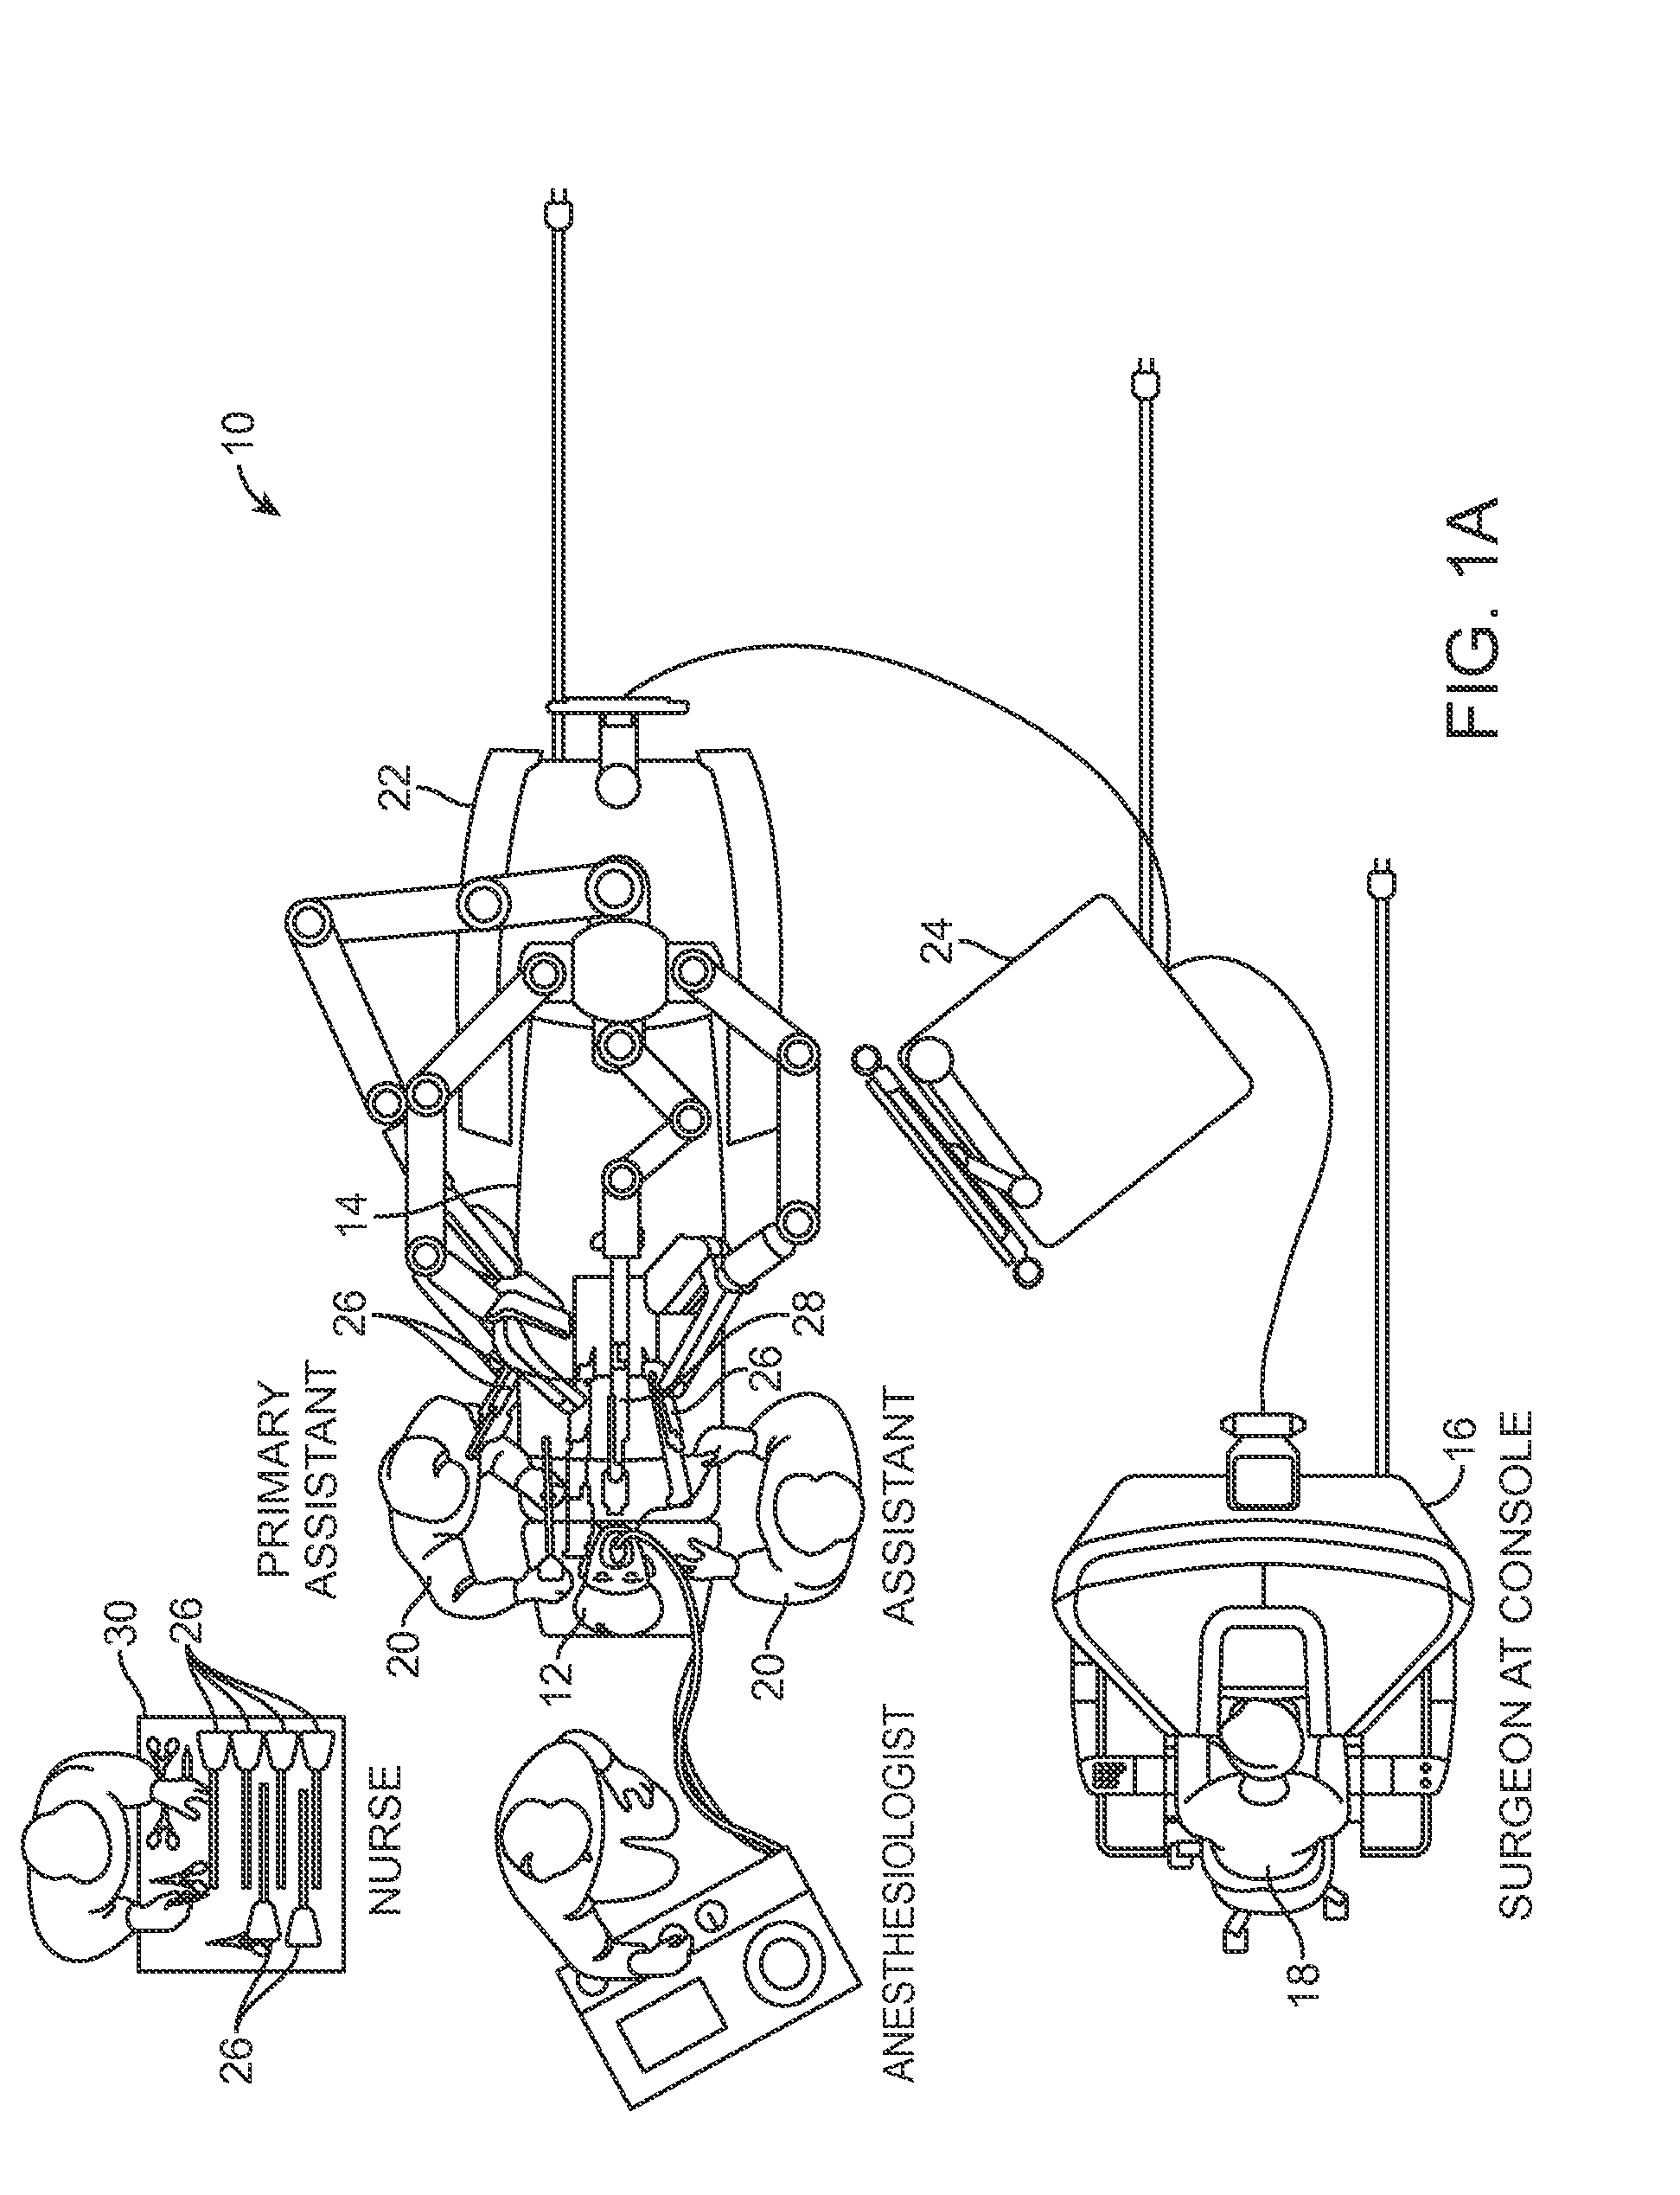 System and methods for positioning a manipulator arm by clutching within a null-perpendicular space concurrent with null-space movement